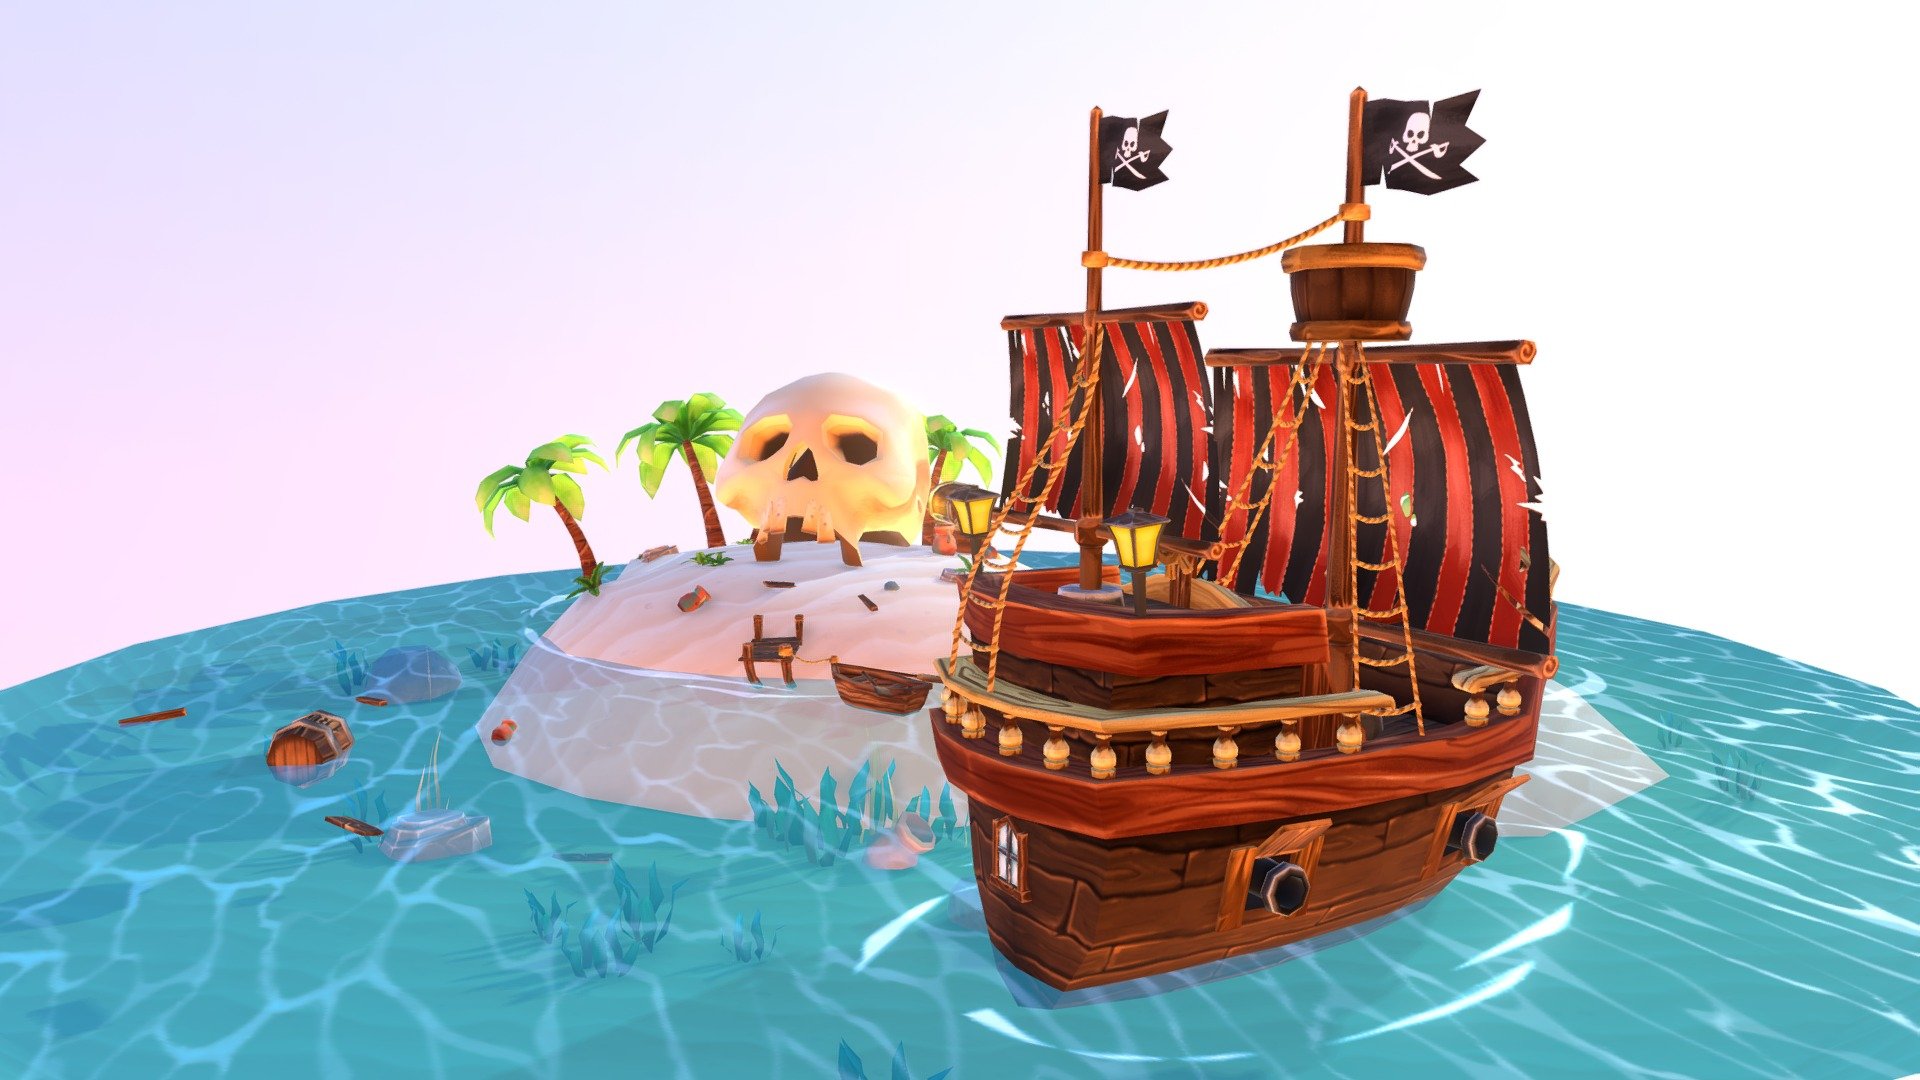 I made this scene for the contest #PiratesChallenge.
I modeled in Maya and texture in photoshop - Pirate Scene - 3D model by Giovanni Caruso (@giovannicaruso) 3d model